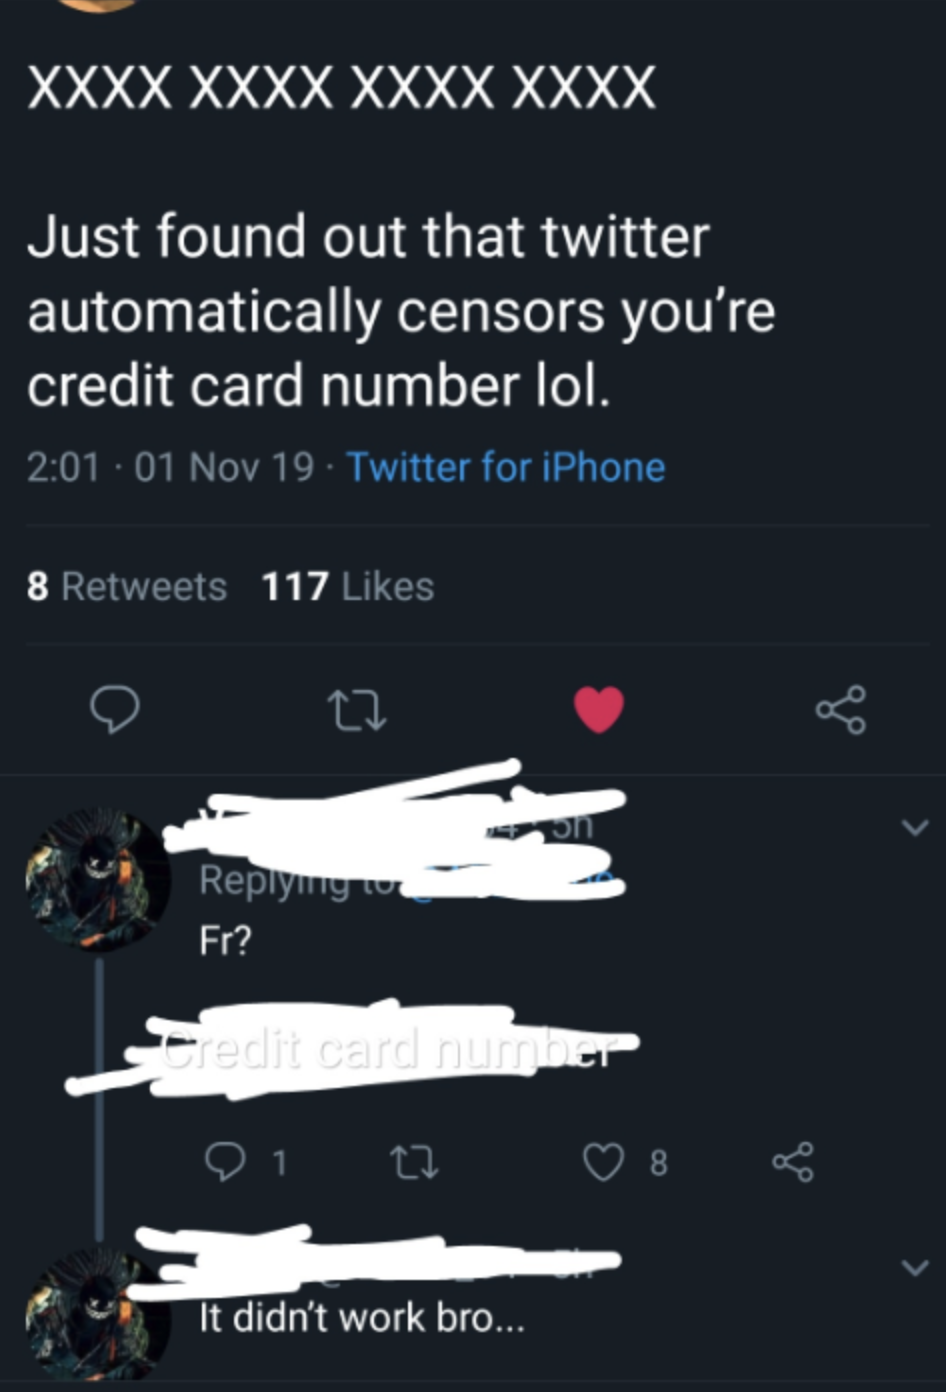 twitter scam where someone says twitter will censor your credit card number if you post it and it doesn&#x27;t work